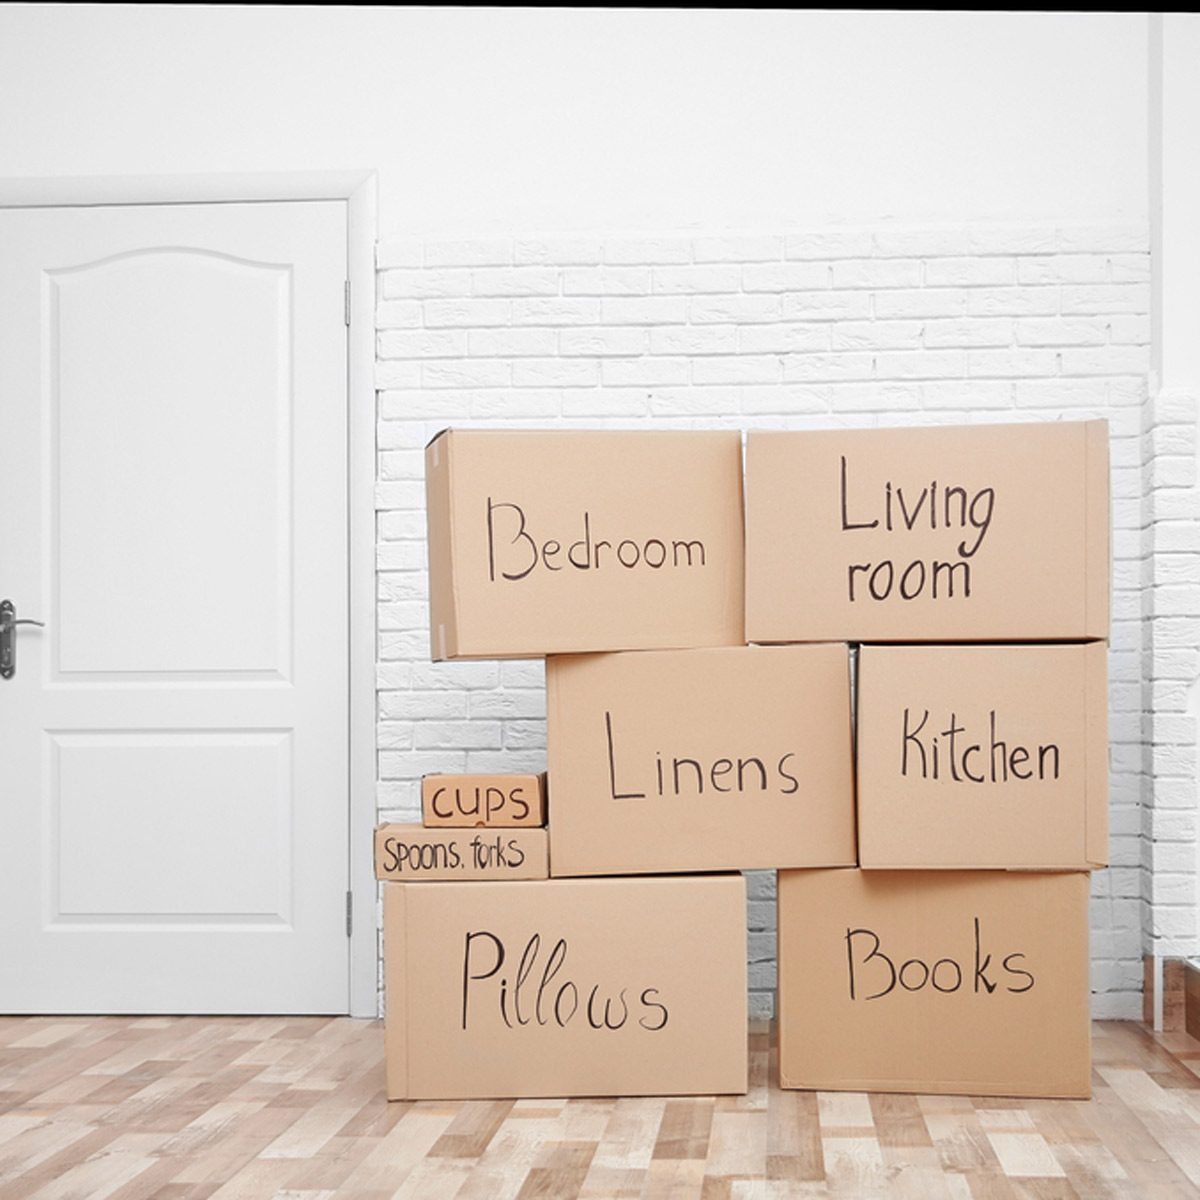 How to Downsize Your Home: 12 Easy Tips